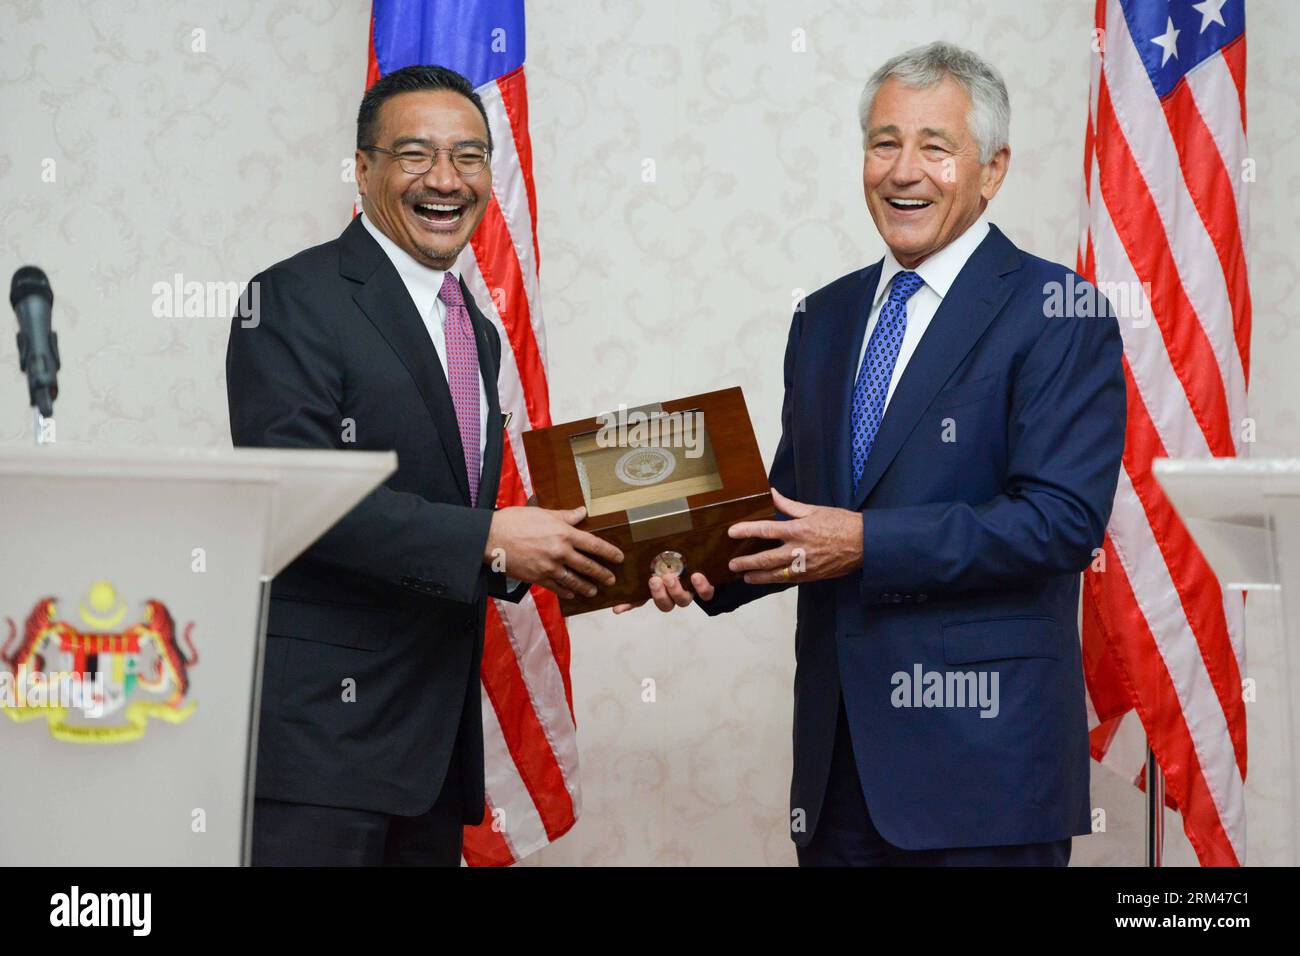 Bildnummer: 60389489  Datum: 25.08.2013  Copyright: imago/Xinhua (130825) -- KUALA LUMPUR, Aug. 25, 2013 (Xinhua) -- U.S. Defence Secretary Chuck Hagel (R) exchanges gifts with his Malaysian counterpart Hishammuddin Hussein at the end of a press conference in Kuala Lumpur, Malaysia, Aug. 25, 2013. Hagel is on a week long trip to Southeast Asia, during which he will also visit Indonesia, the Philippines and attend the ASEAN Defence Ministers Meeting in Brunei. (Xinhua/Chong Voon Chung)(wjd) MALAYSIA-US-DEFENCE MINISTERS-PRESS CONFERENCE PUBLICATIONxNOTxINxCHN People Politik Verteidigungsministe Stock Photo